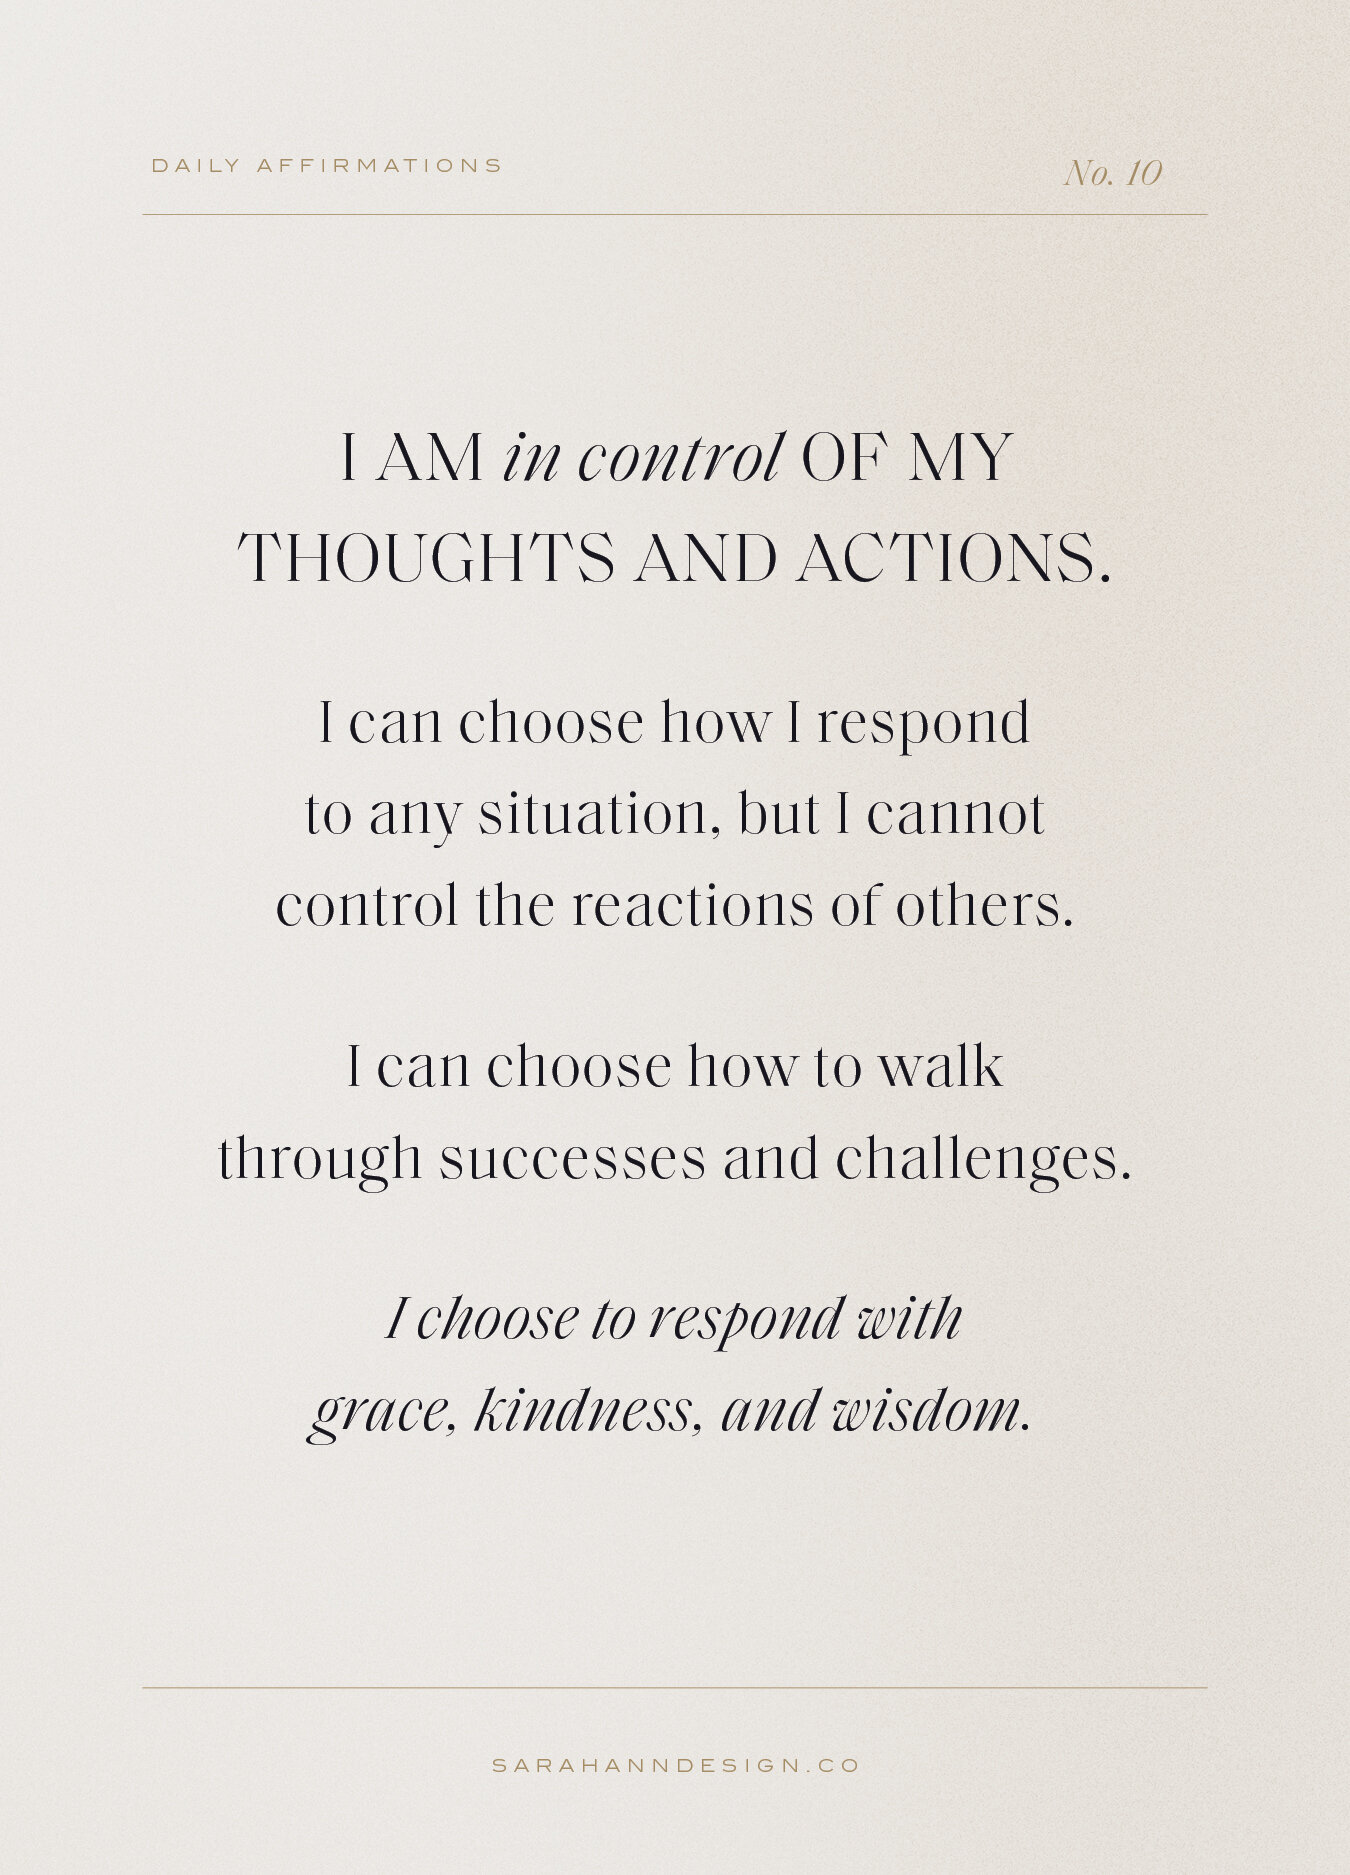 Daily Affirmations for the Creative Soul - Affirmations by Sarah Ann Design10